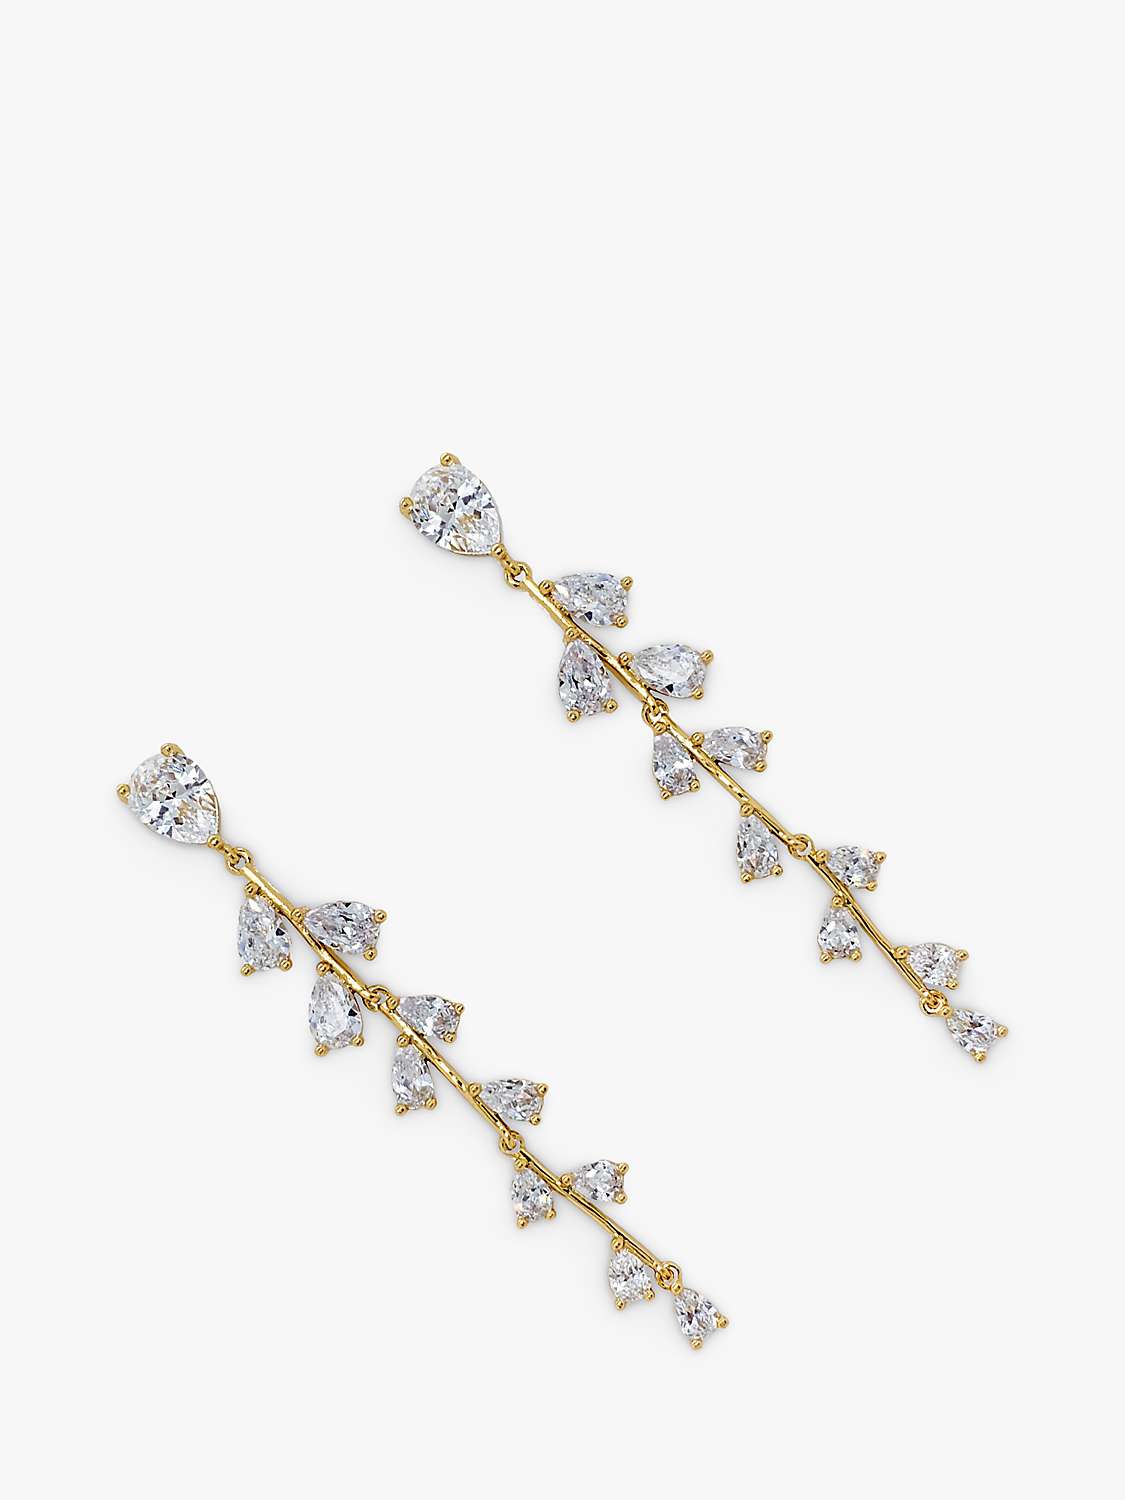 Buy Ivory & Co. Willow Drop Earrings, Gold Online at johnlewis.com